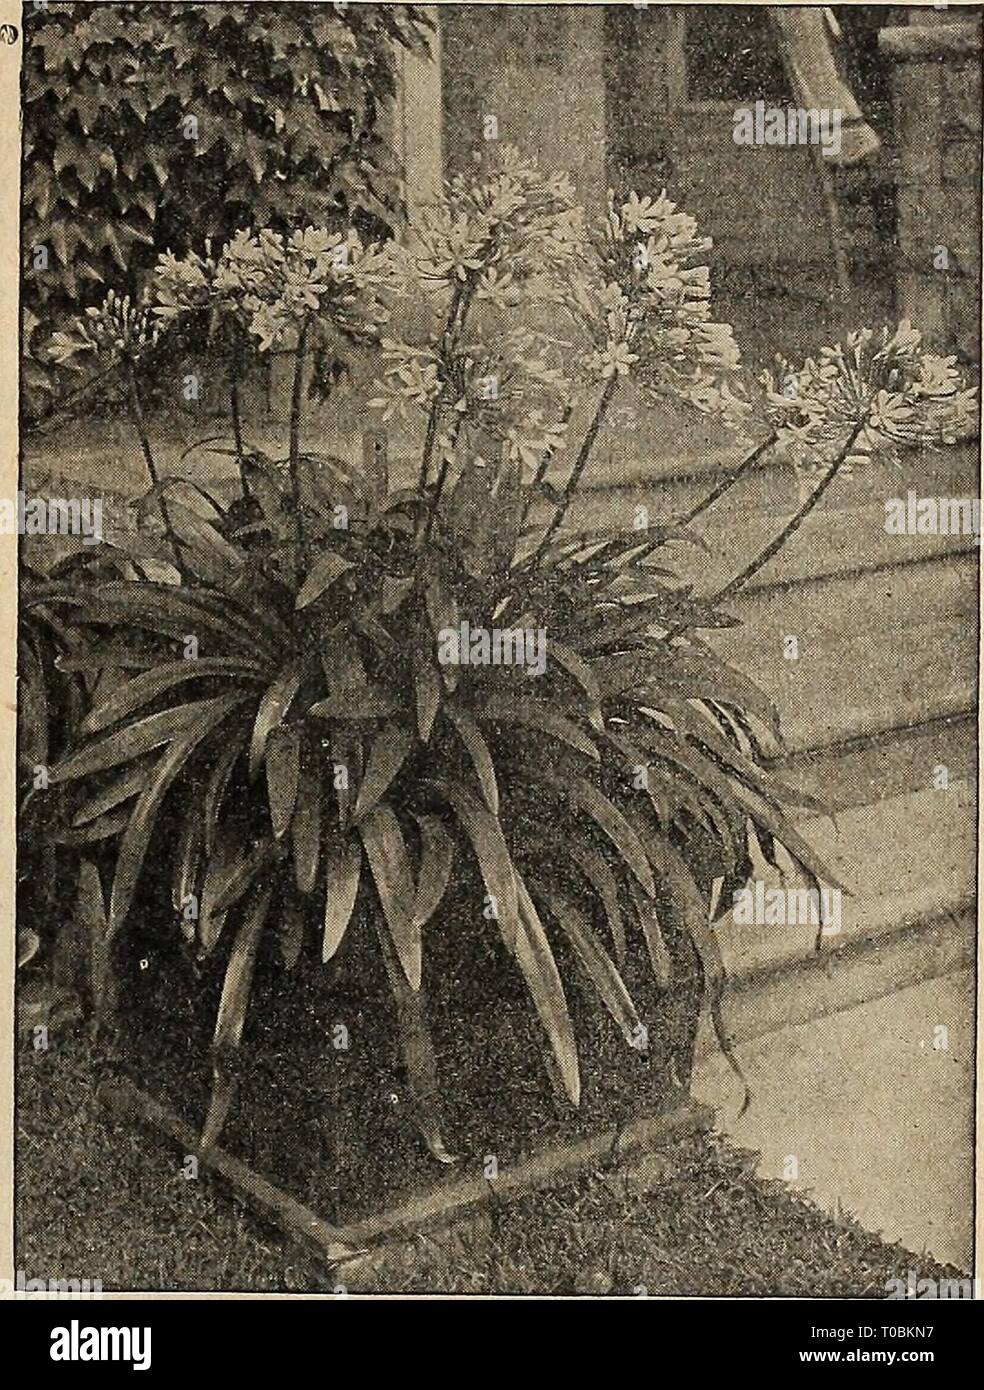 Dreer's garden book 1920 (1920) Dreer's garden book 1920 dreersgardenbook1920henr 0 Year: 1920  Dreer's American Hybrid Amaryllis Agapanthus Umbellatus AMORPHOPHALLUS (Devil's Tongue, or Snake Palm) Rlvieri. Particularly handsome plant for growing either in clumps or as a solitary specimen. Should be planted in May in warm, sunny situation in extra rich soil; the flowers ap- pear before the leaves and rise to a height of 2 feet and re- semble a gigantic black Calla. This is soon followed by the massive tropical-looking leaves, supported by thick, beauti- fully marbled stems. Large bulbs, 50 ct Stock Photo